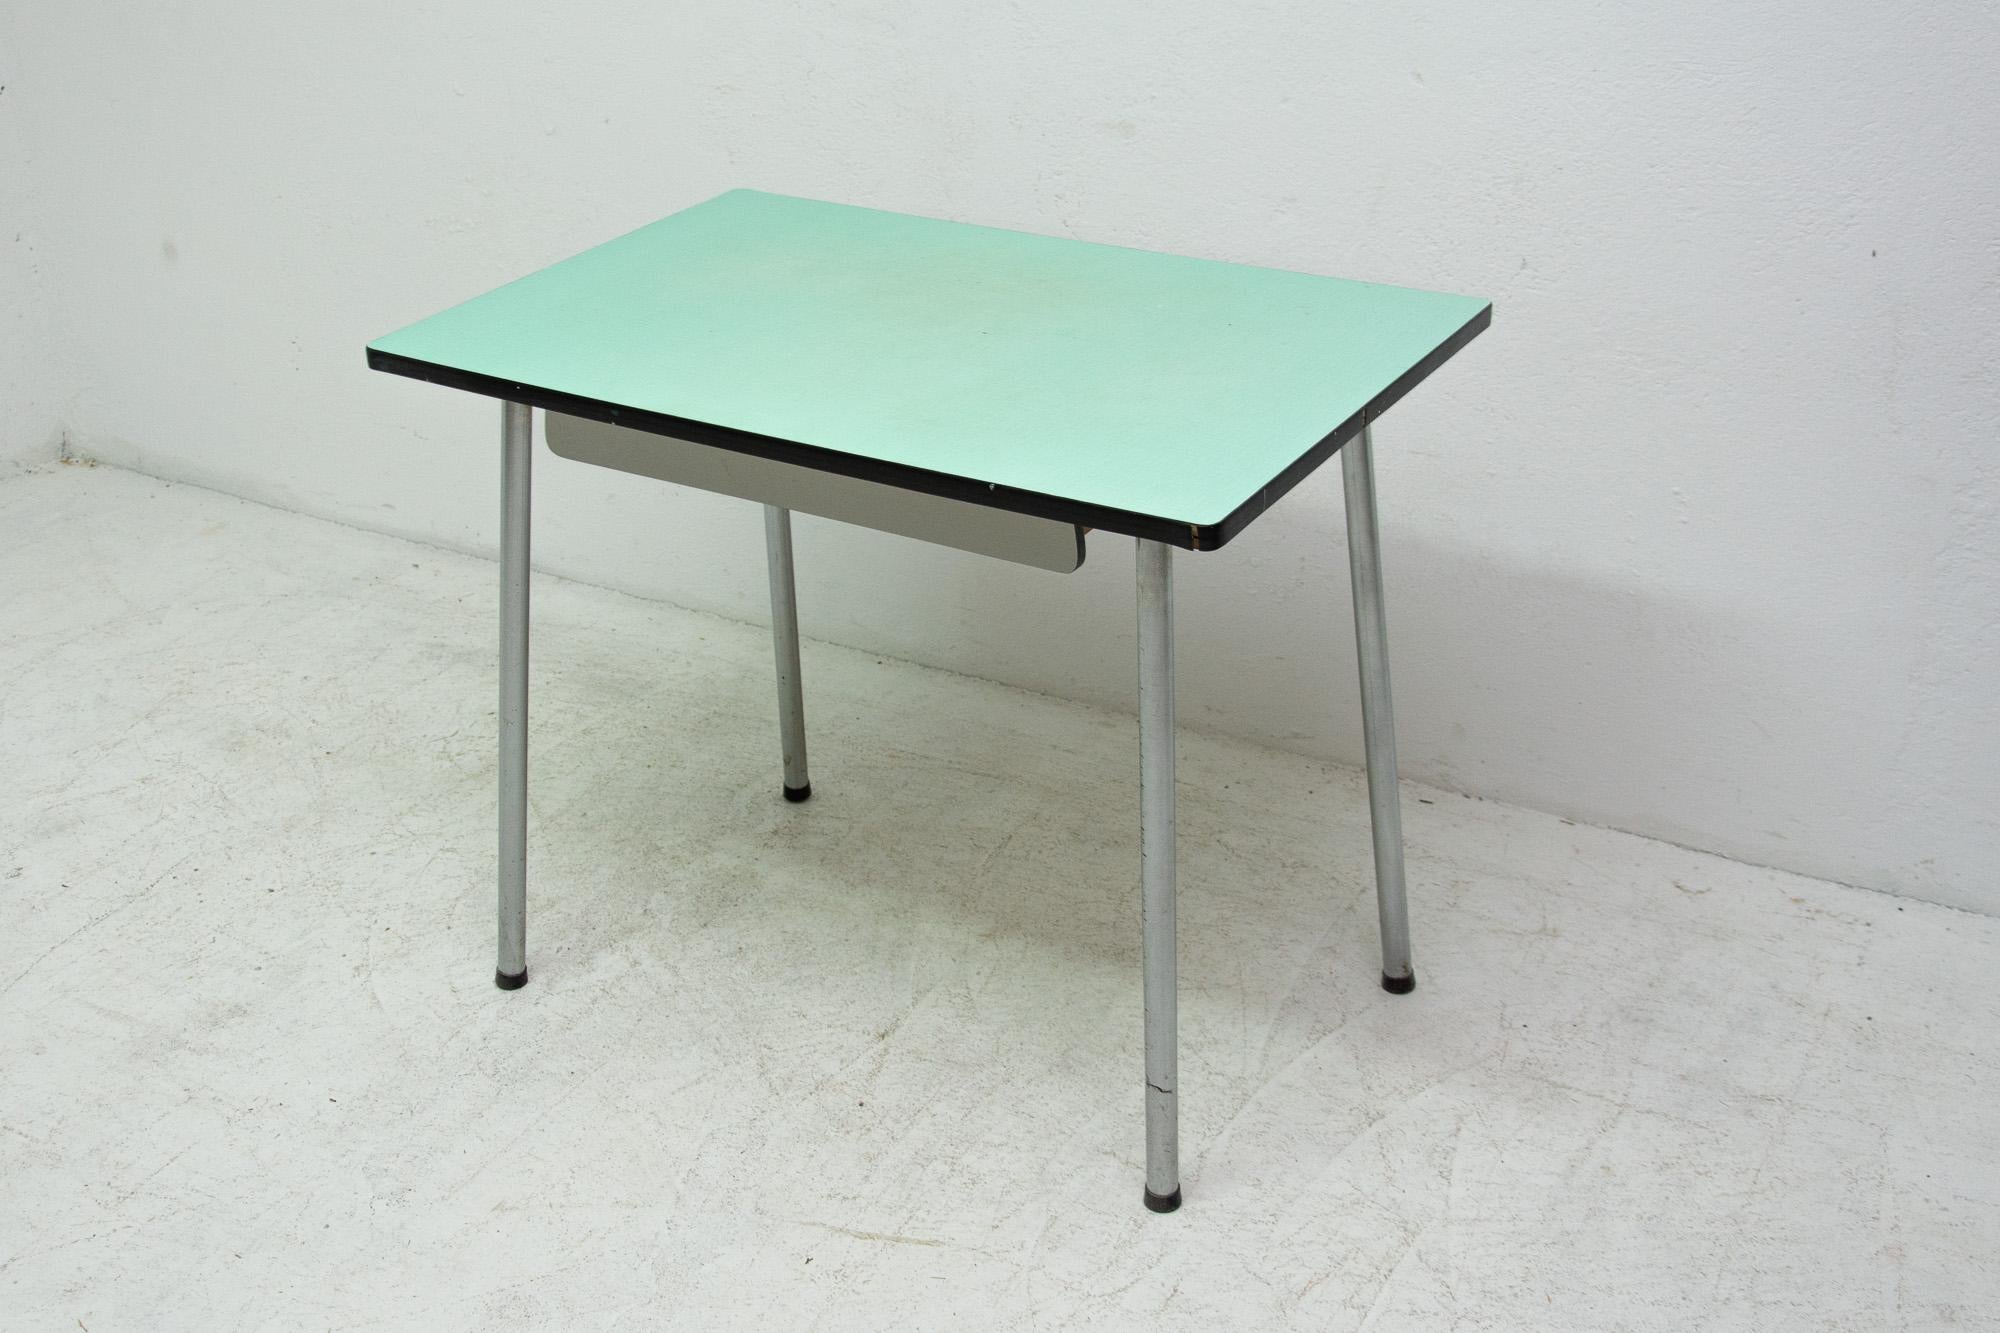 Midcentury Formica Writing Desk or Side Table, 1960s, Czechoslovakia In Good Condition In Prague 8, CZ